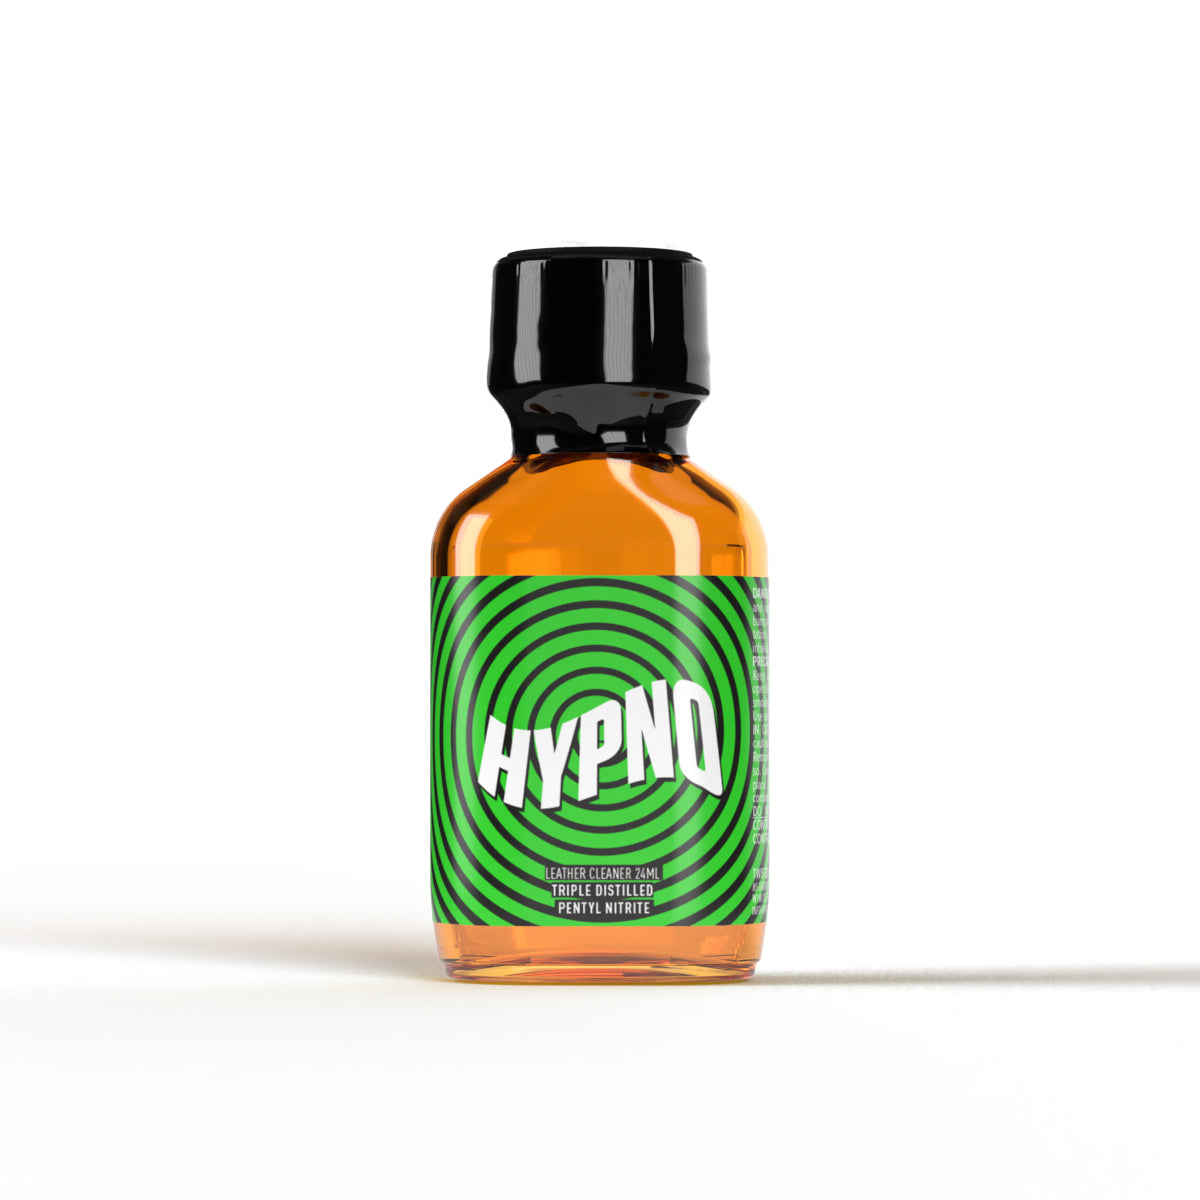 A bottle of Hypno Poppers by Twisted Beast.